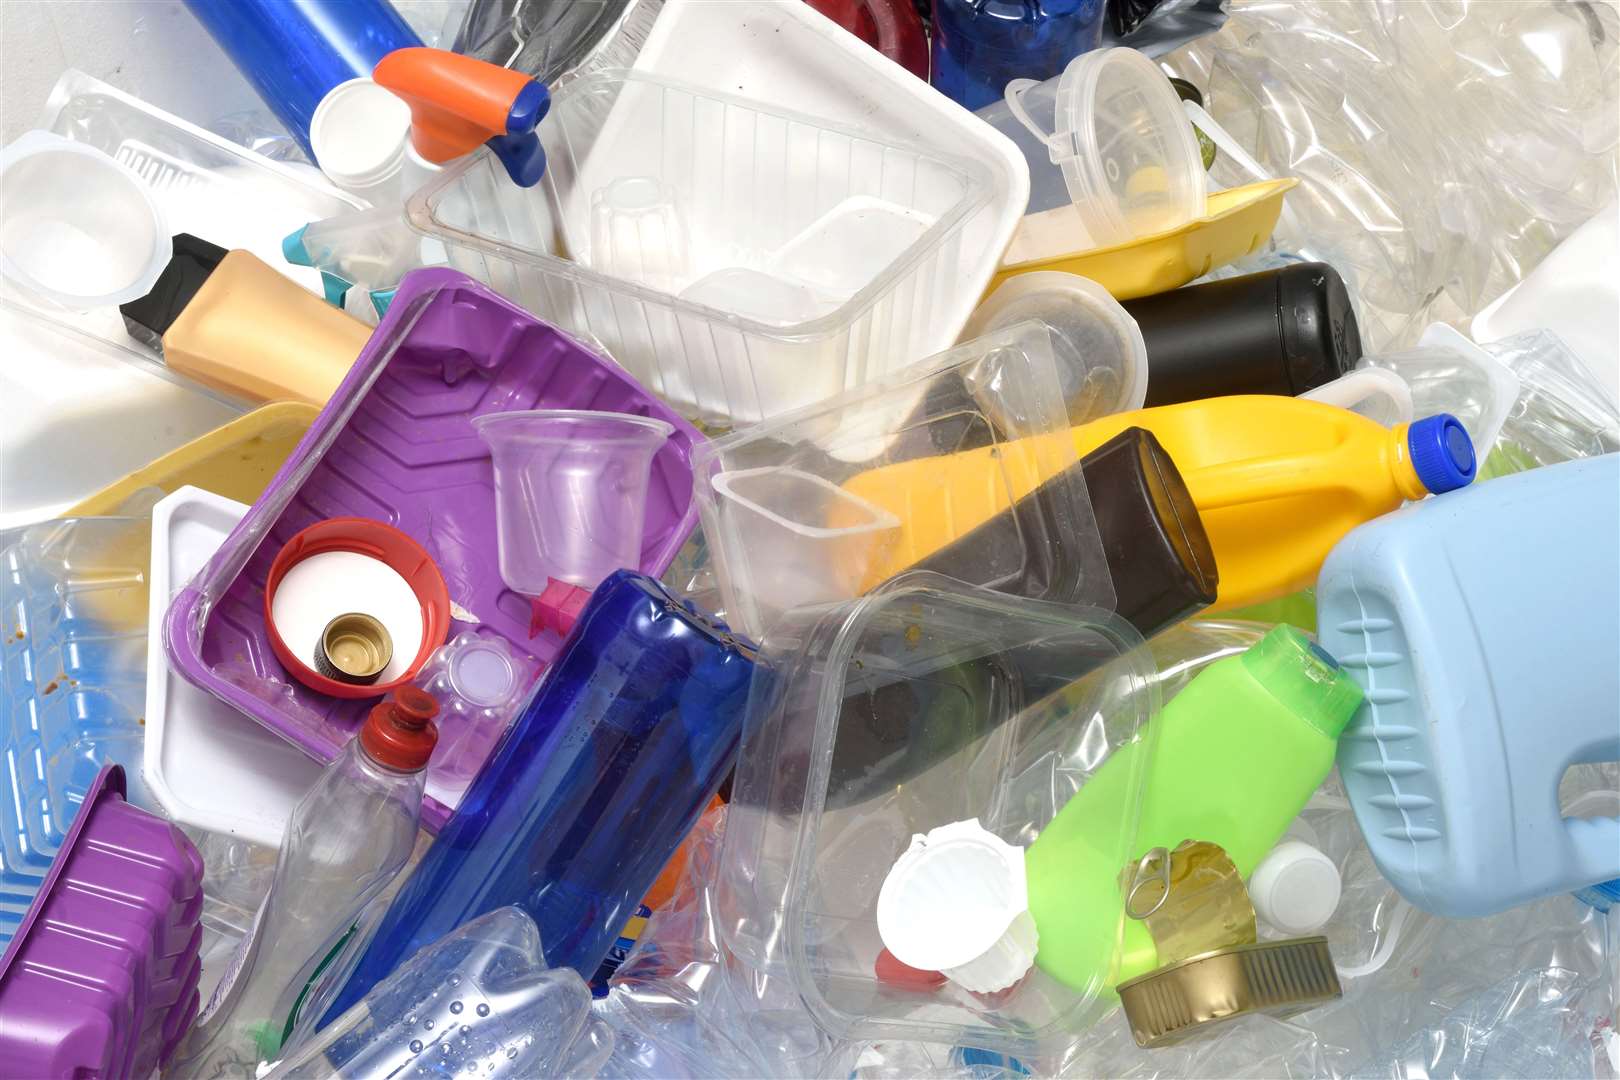 Environmental campaigners say addressing single-use plastics is key to tackling the problems